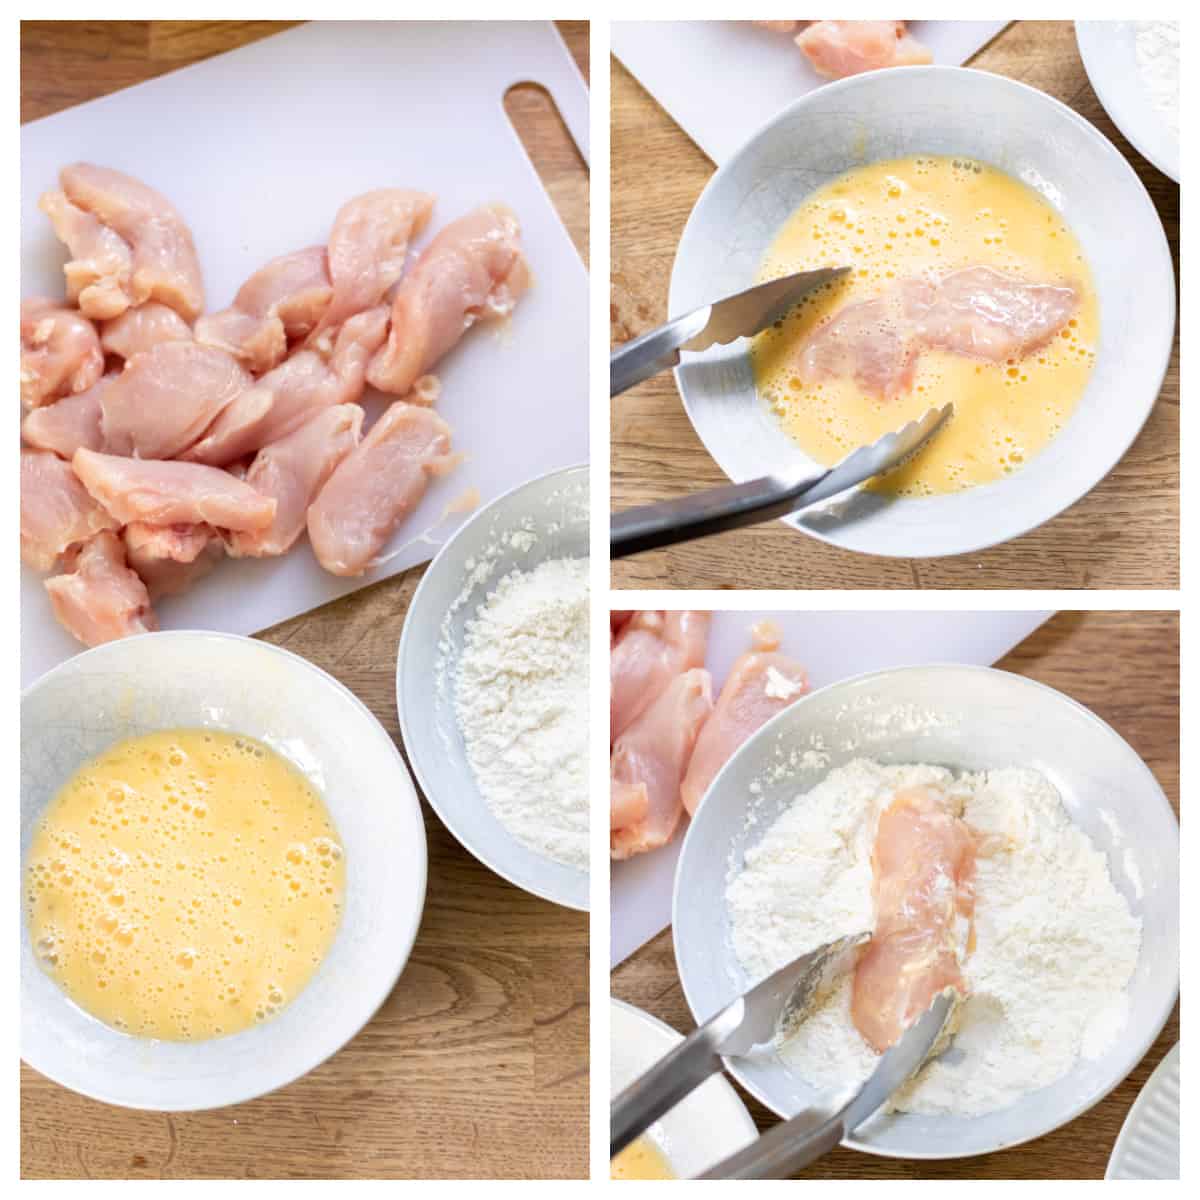 Dredging chicken strips in egg and flour.